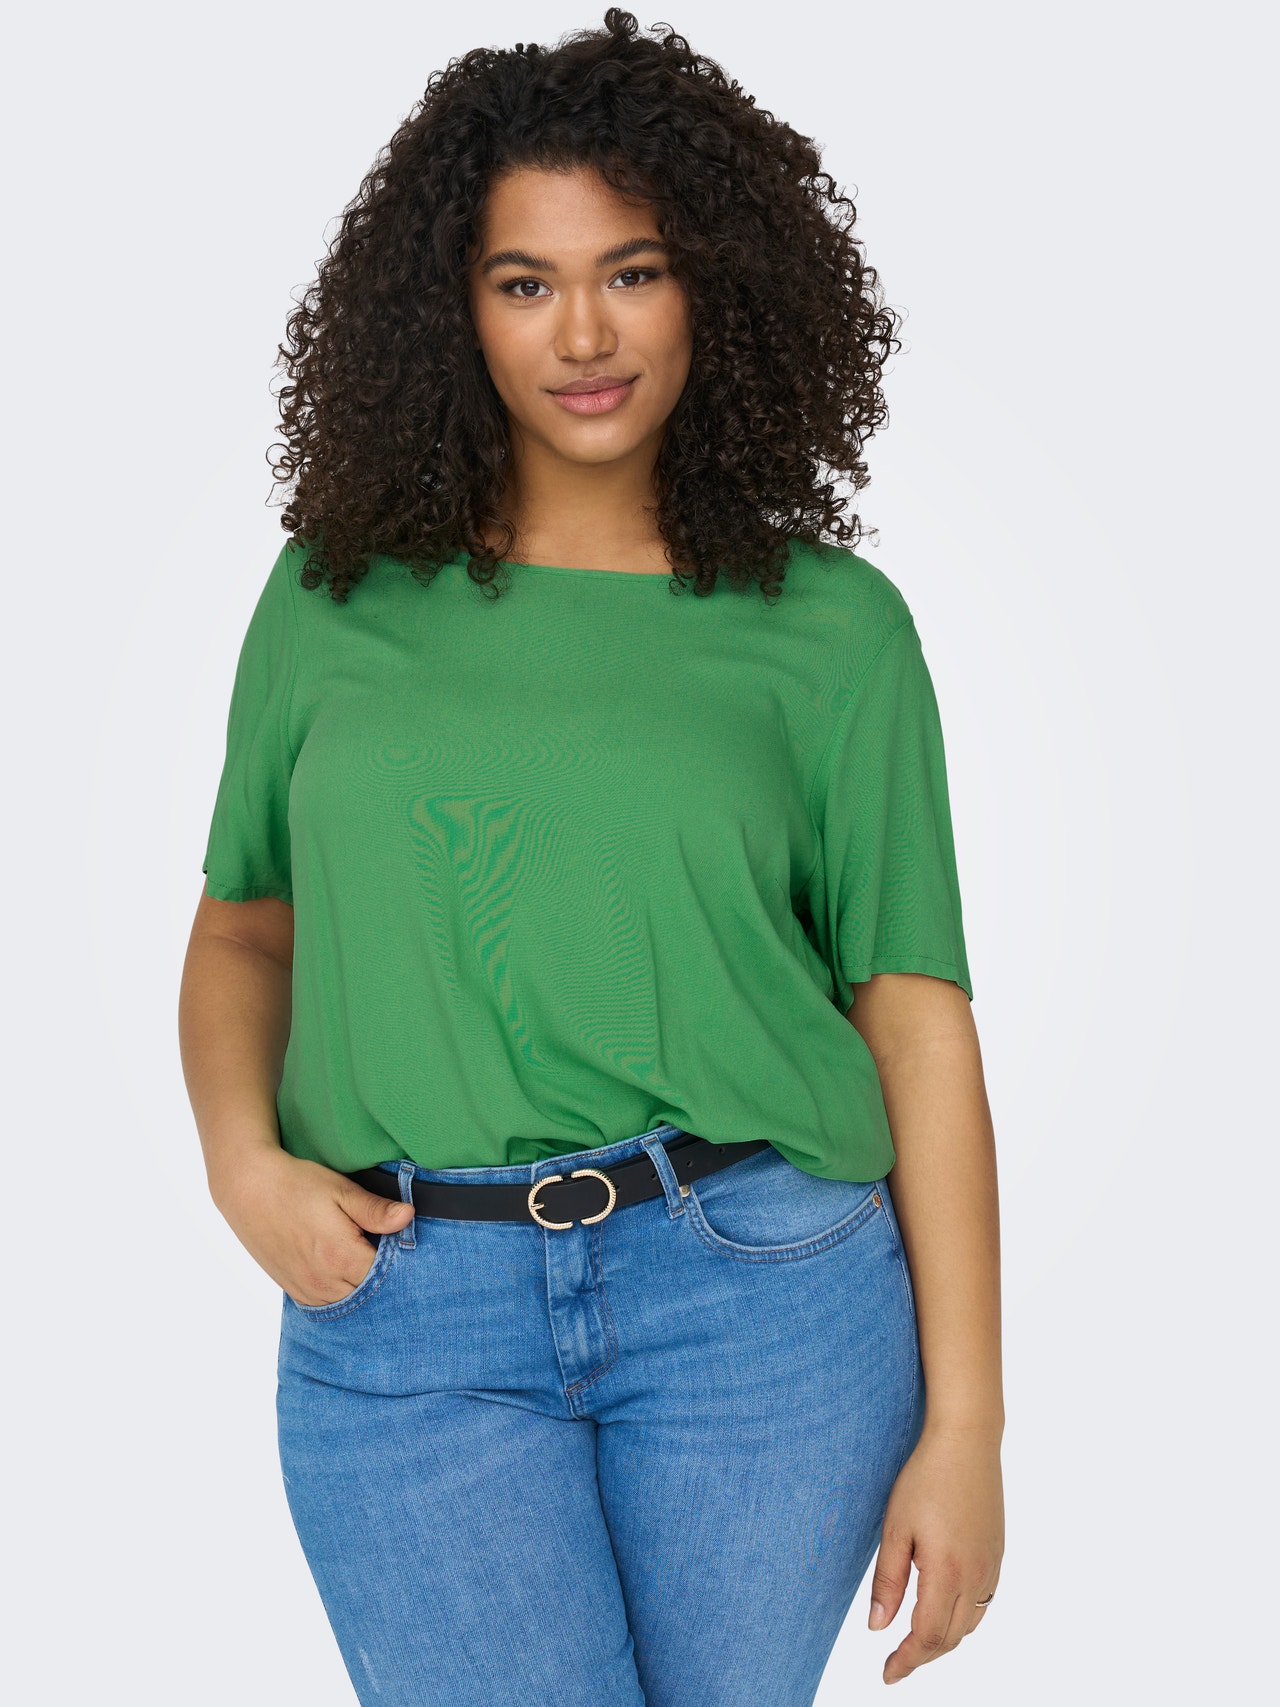 ONLY Tops Corte regular Cuello barco -Kelly Green - 15292356